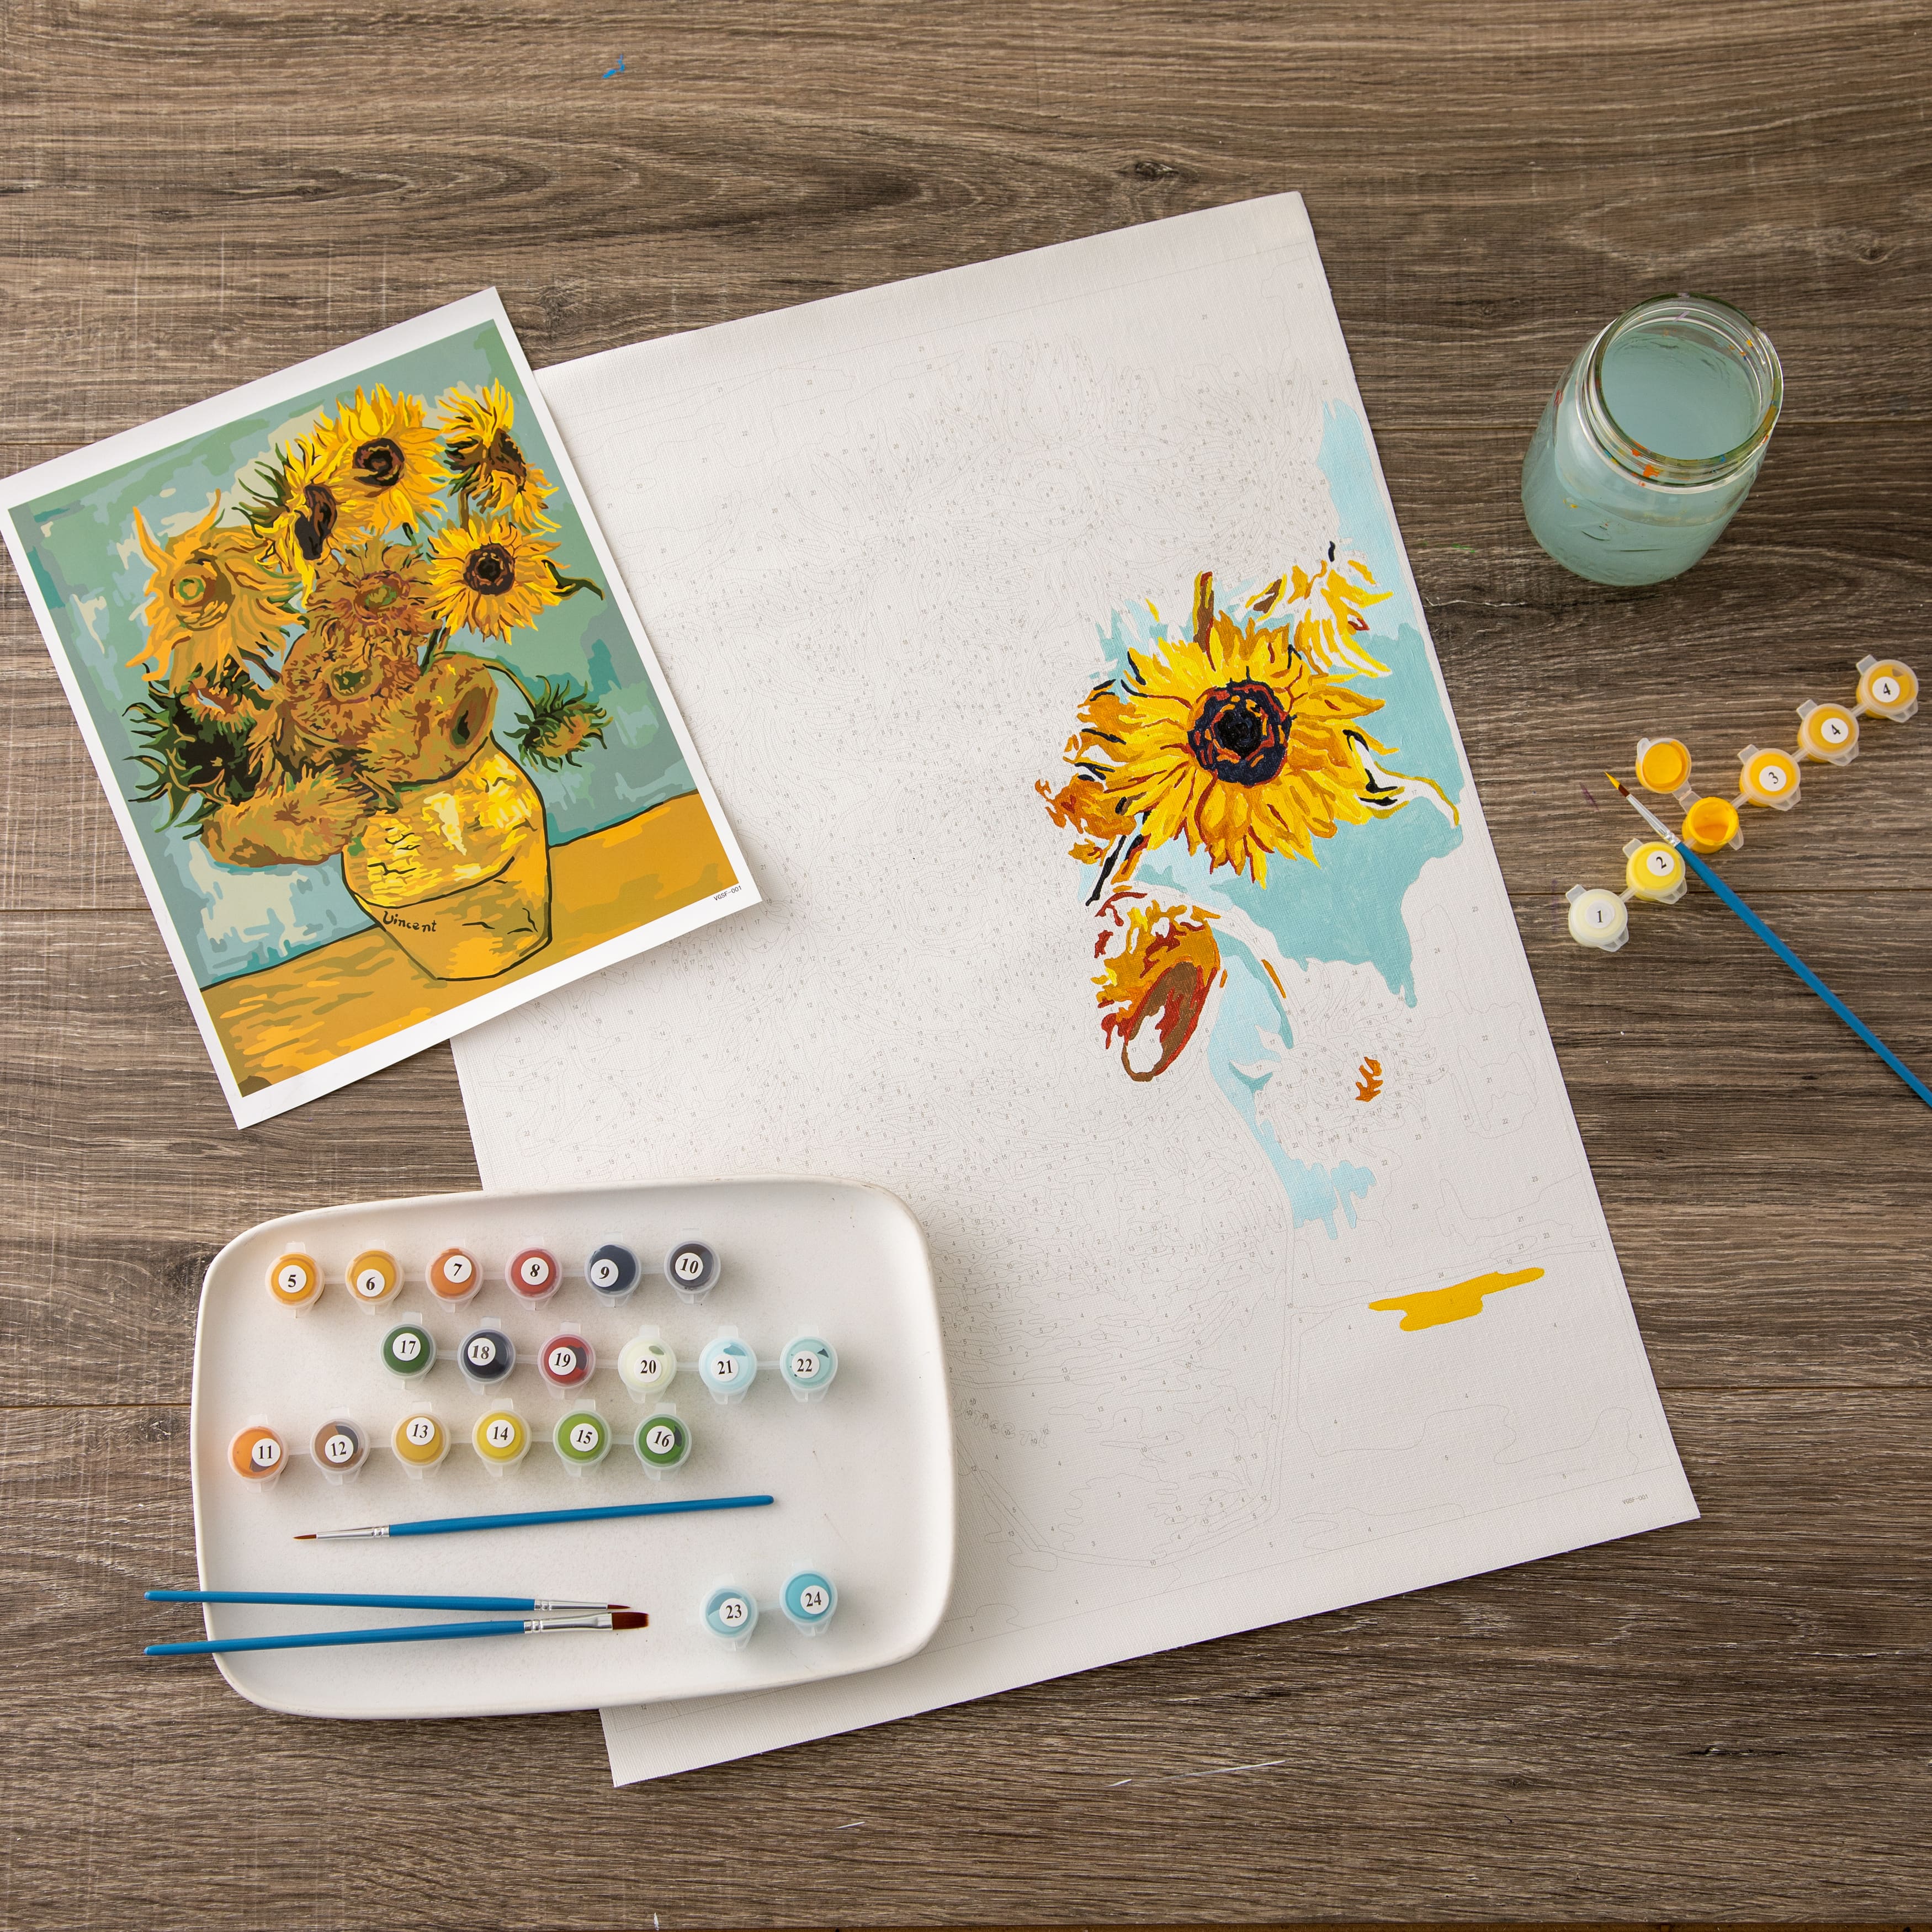 Paint by Number Kit! — The Craft Studio